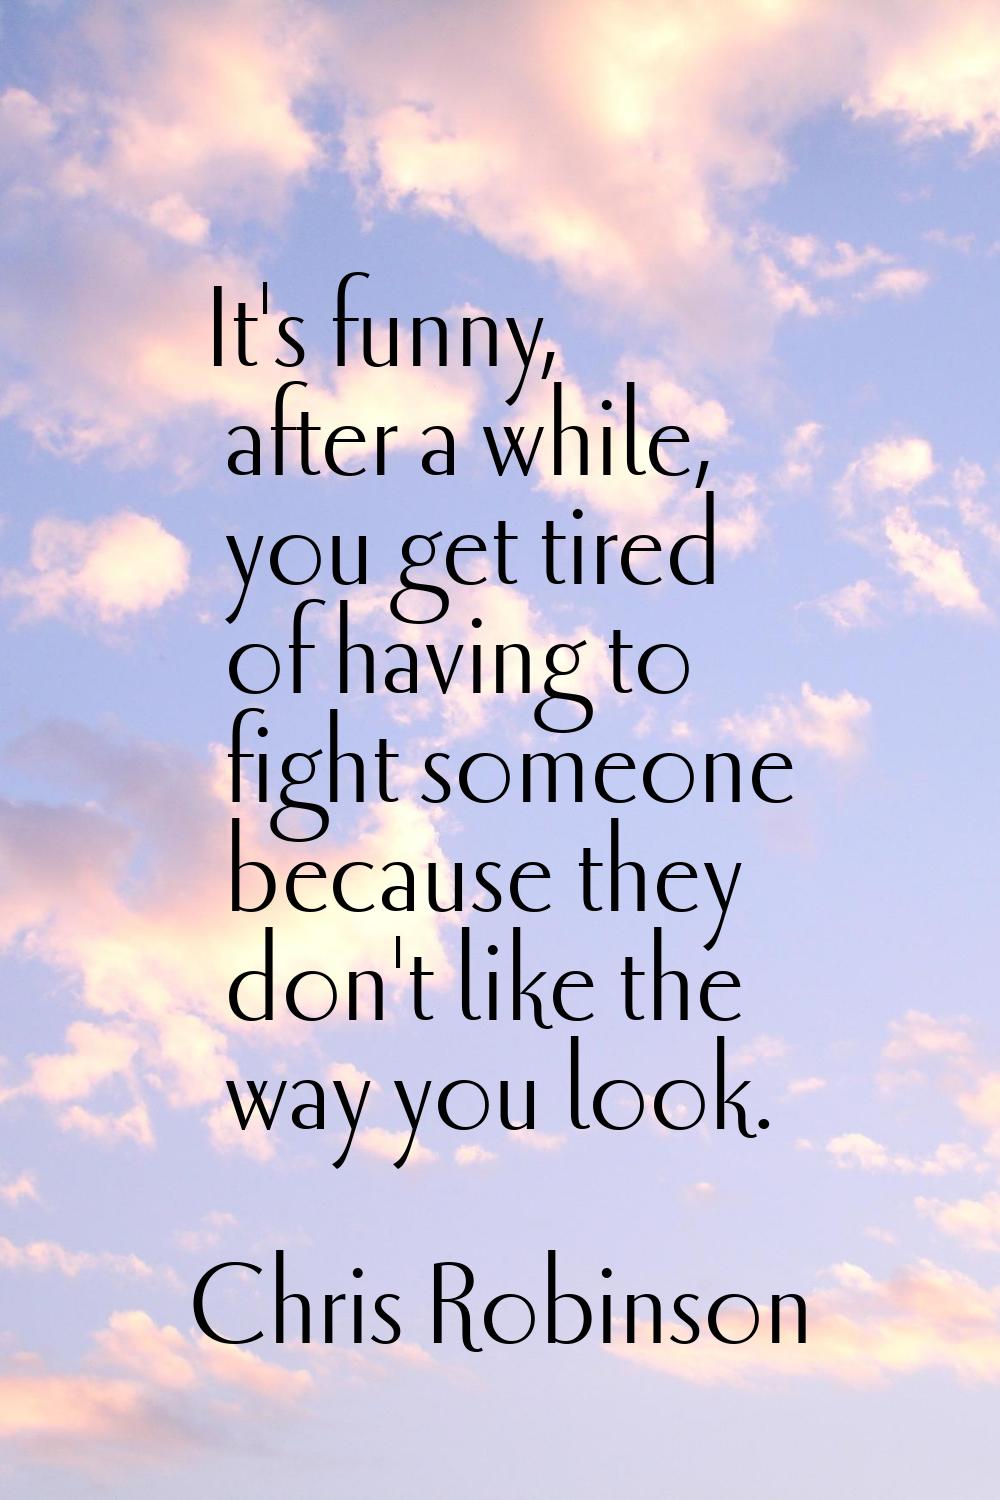 It's funny, after a while, you get tired of having to fight someone because they don't like the way